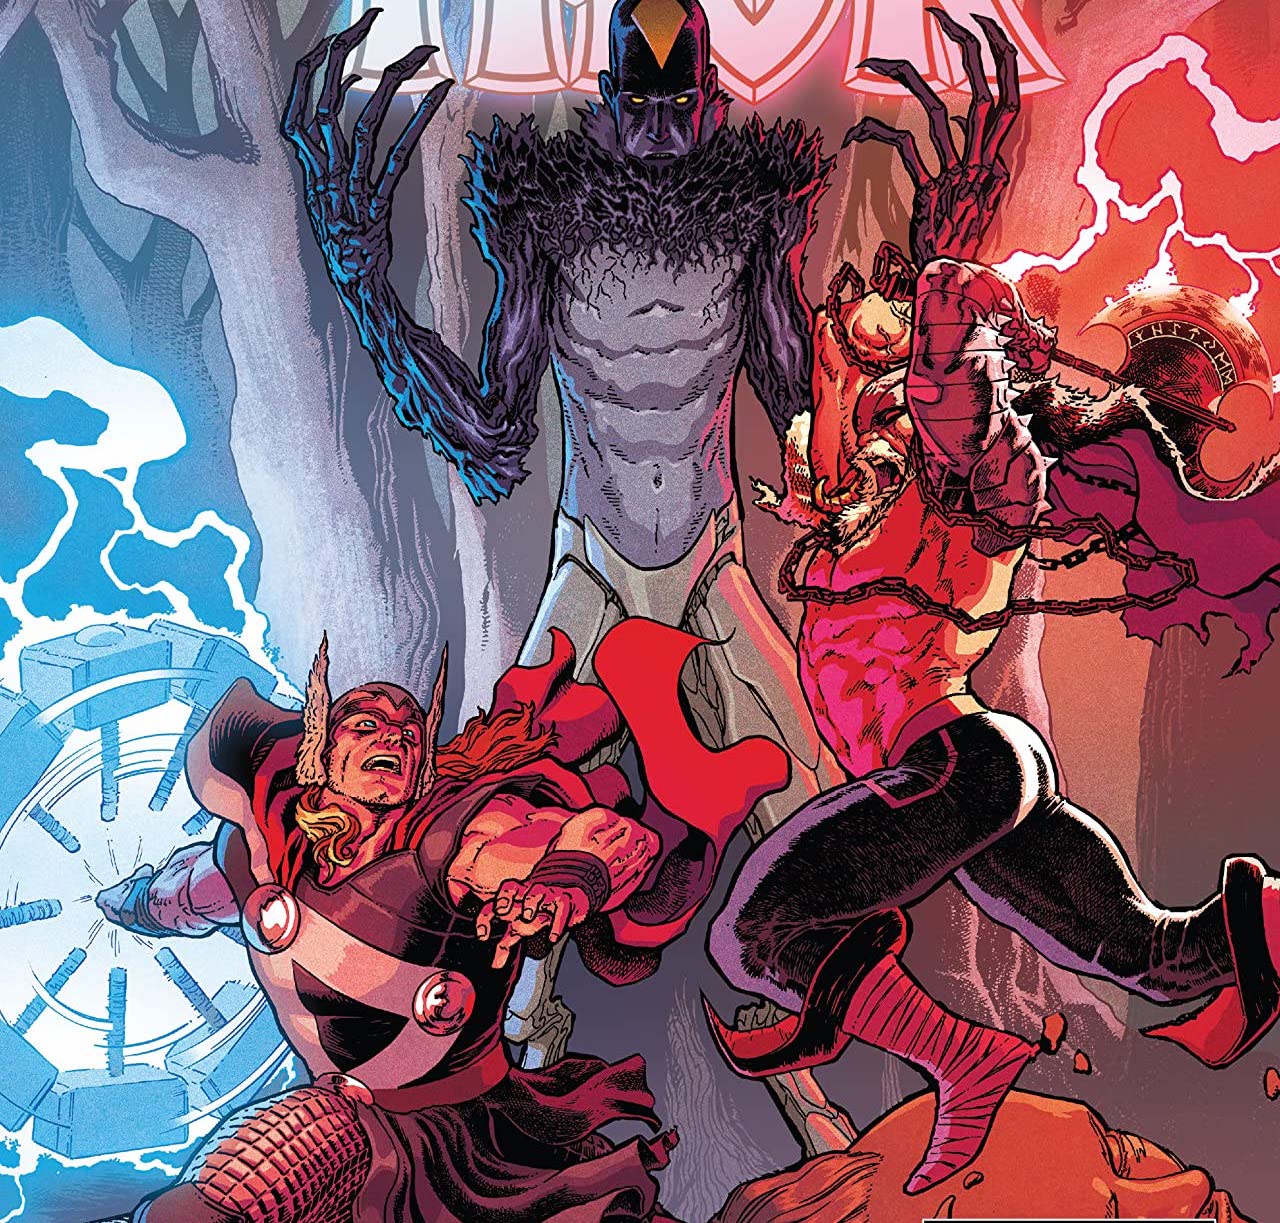 'Thor Annual' #1 is a gorgeous and satisfying self-contained story